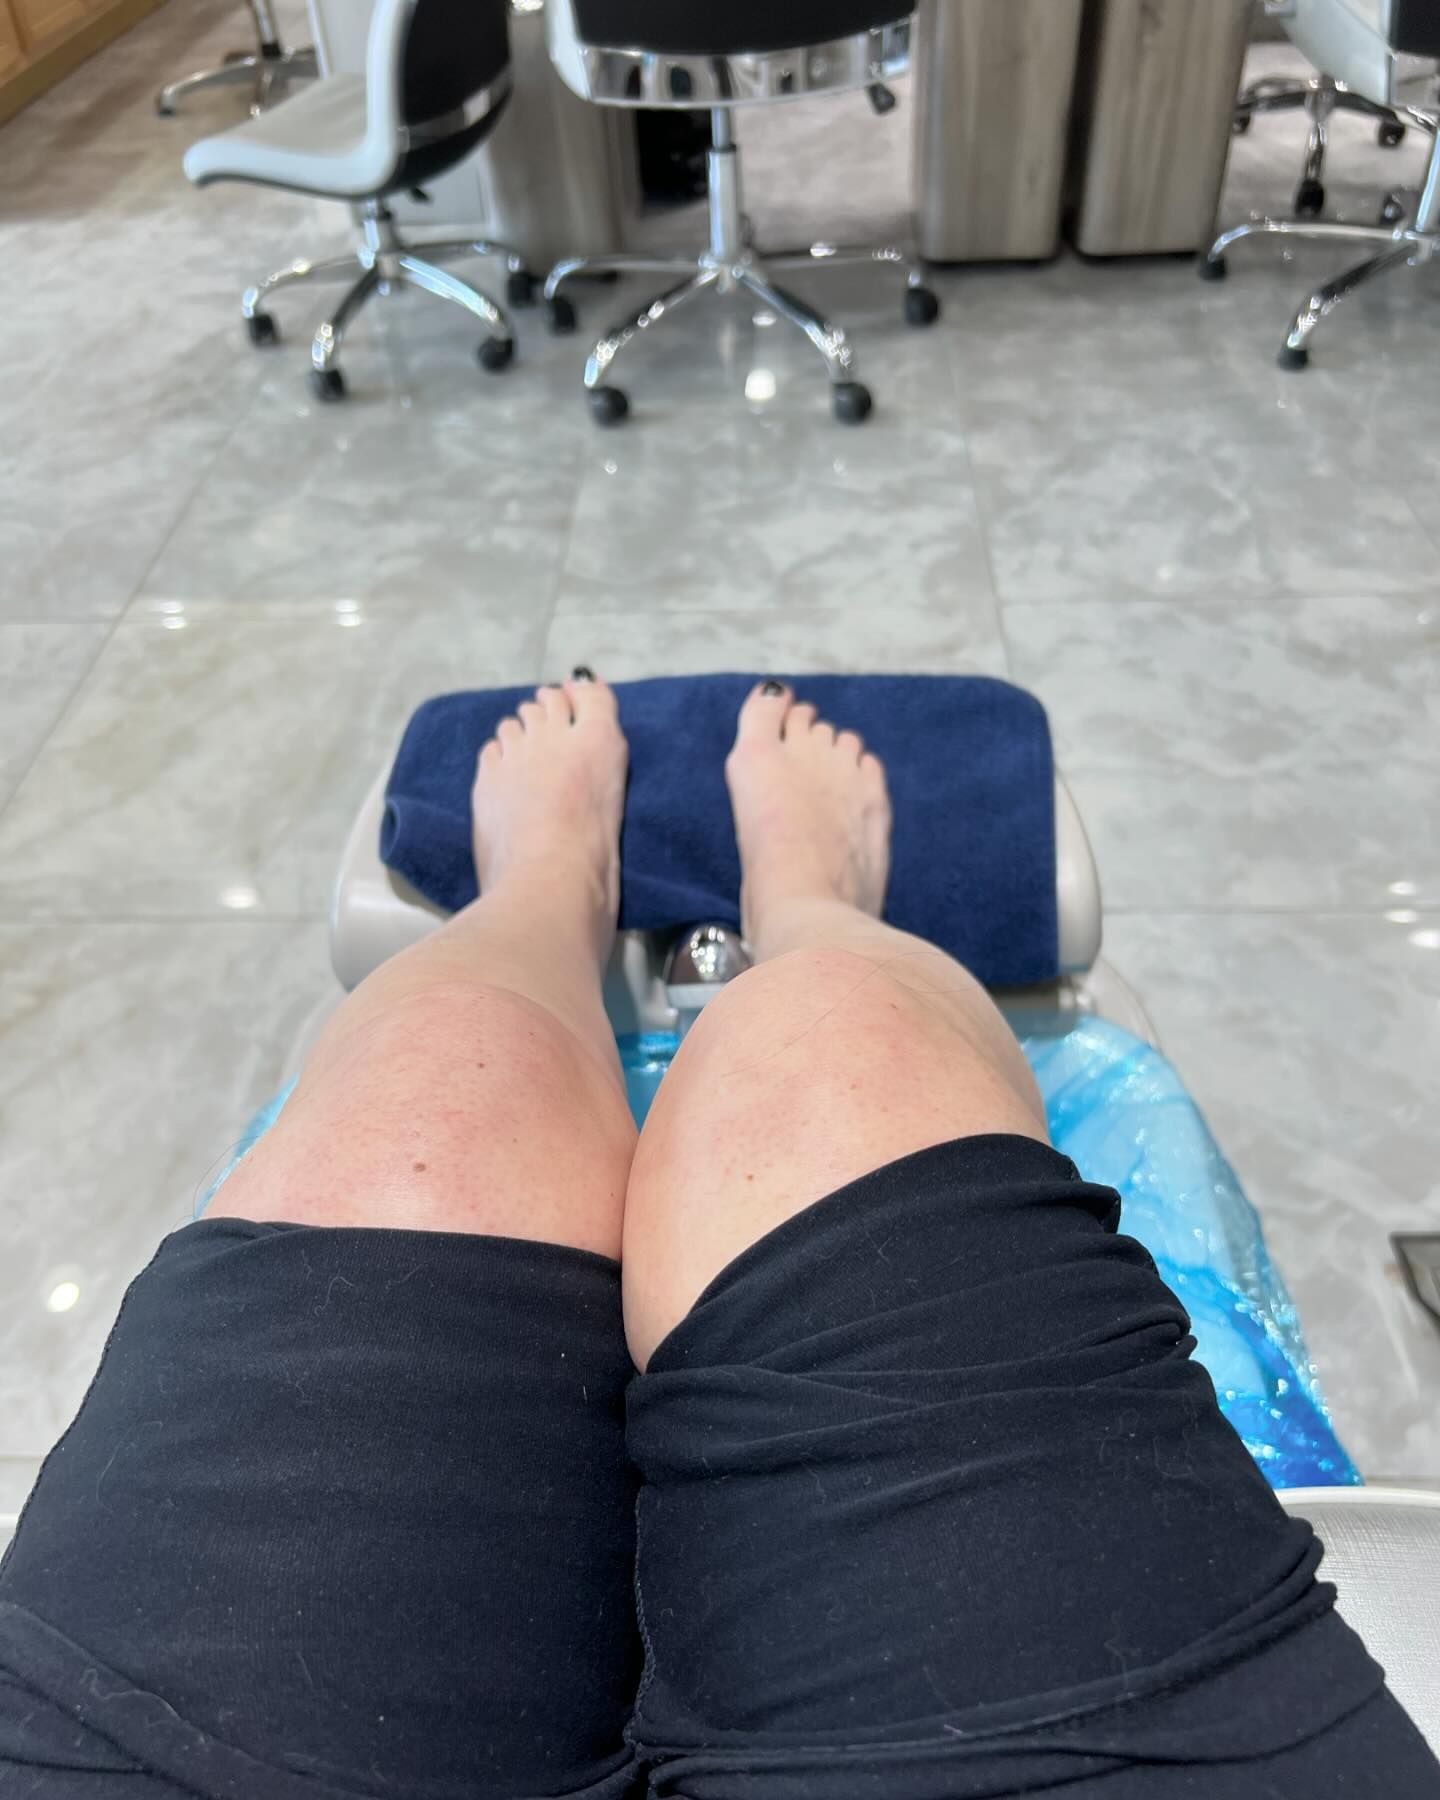 It’s vacation time!!! Starting it off right with a pedicure 🖤🖤🖤